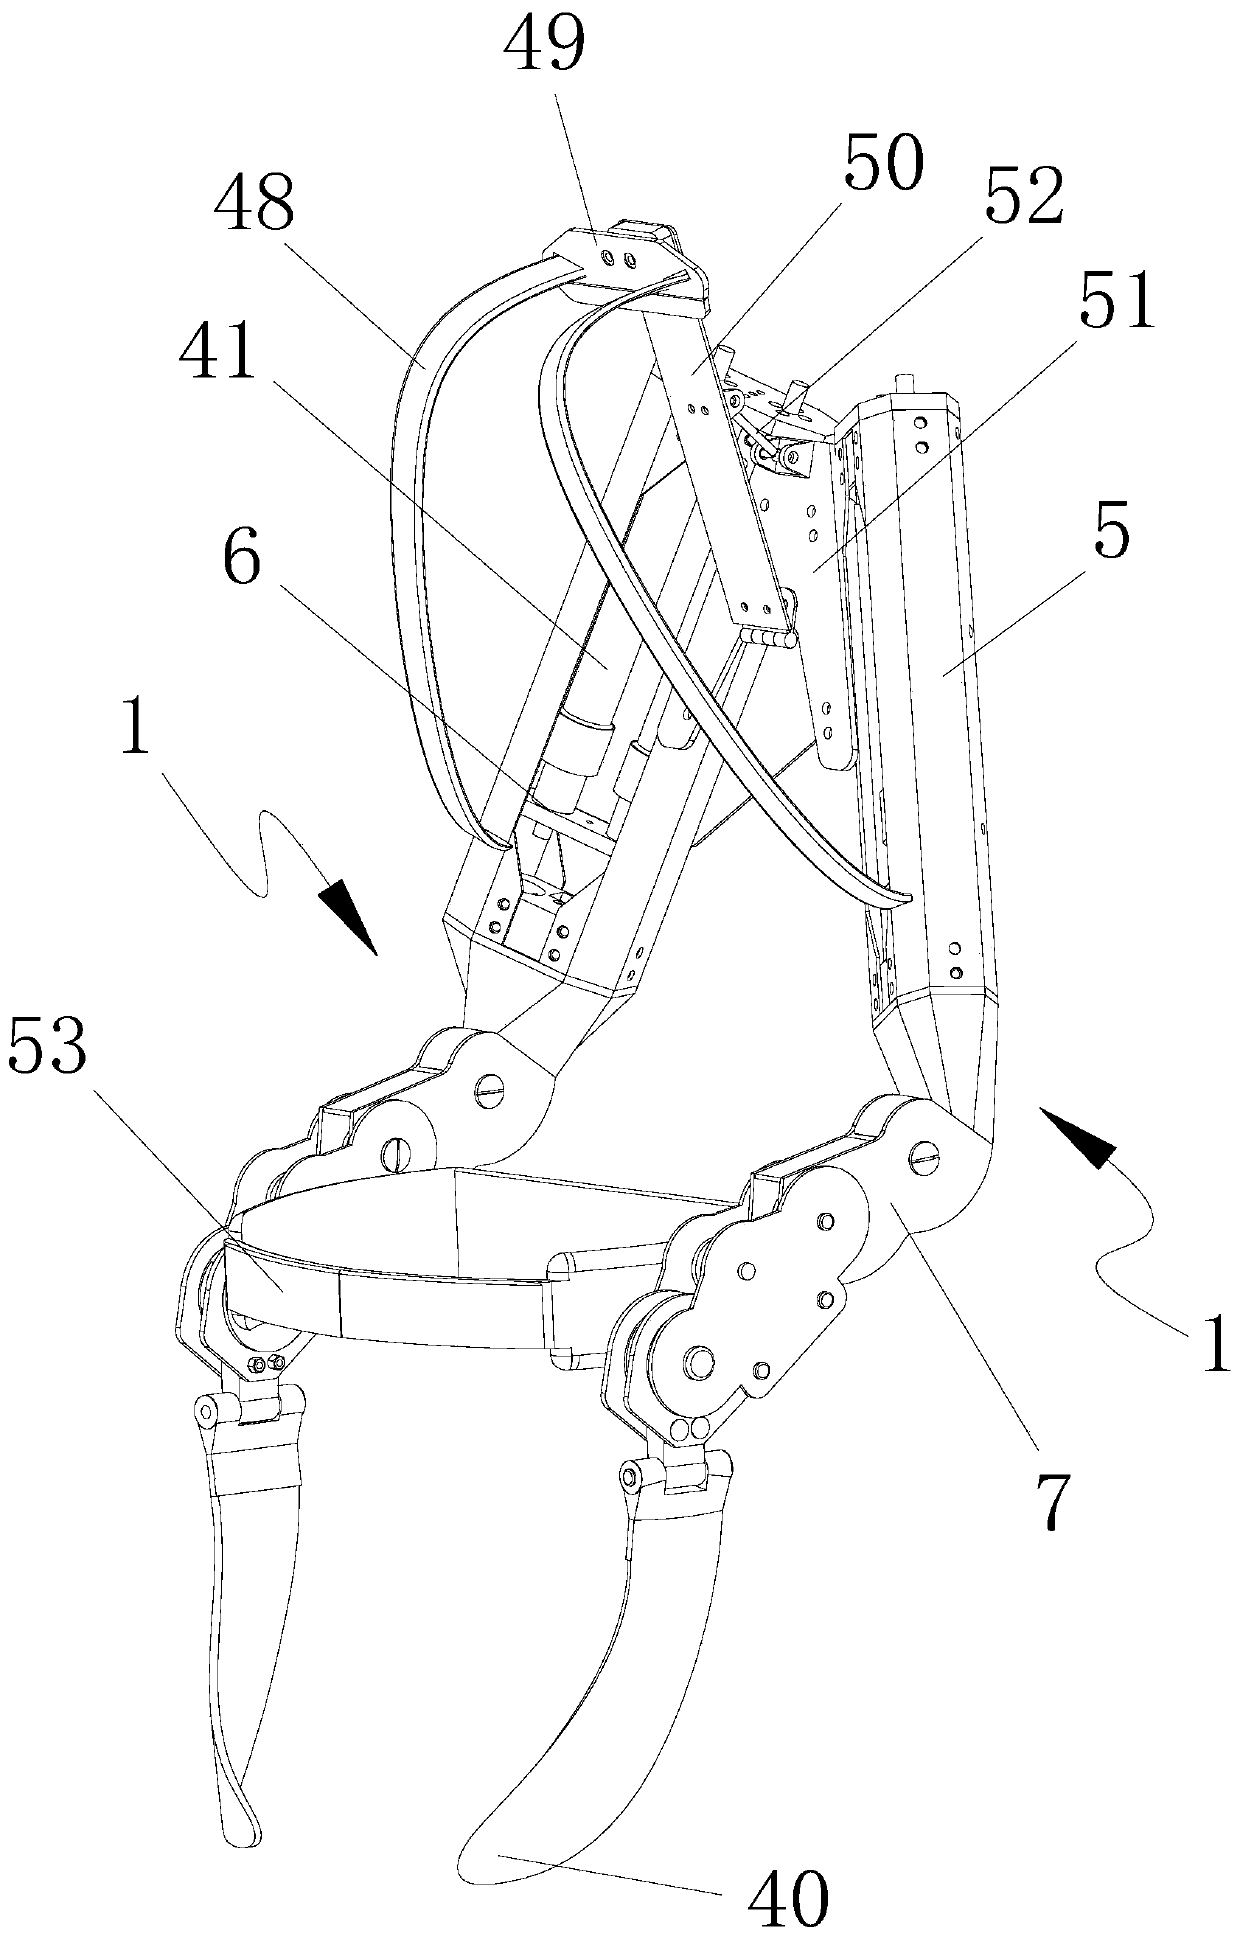 An exoskeleton assisting device